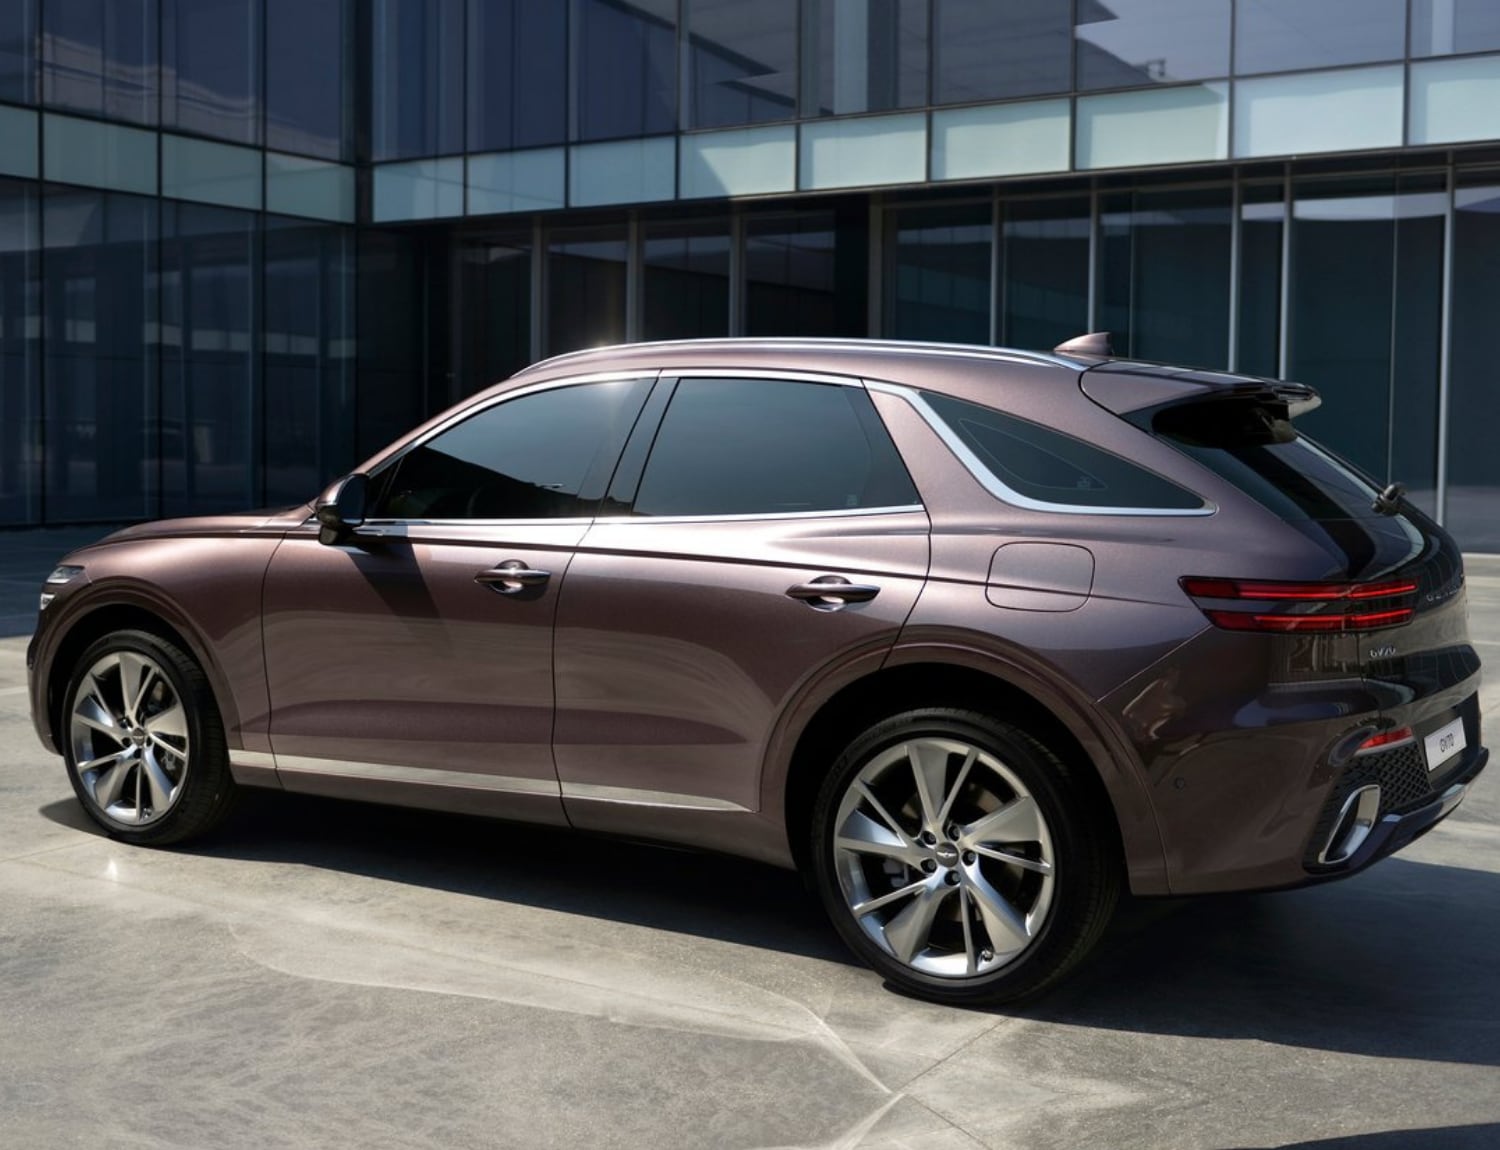 Rear exterior driver side view of the 2022 Genesis GV70 SUV